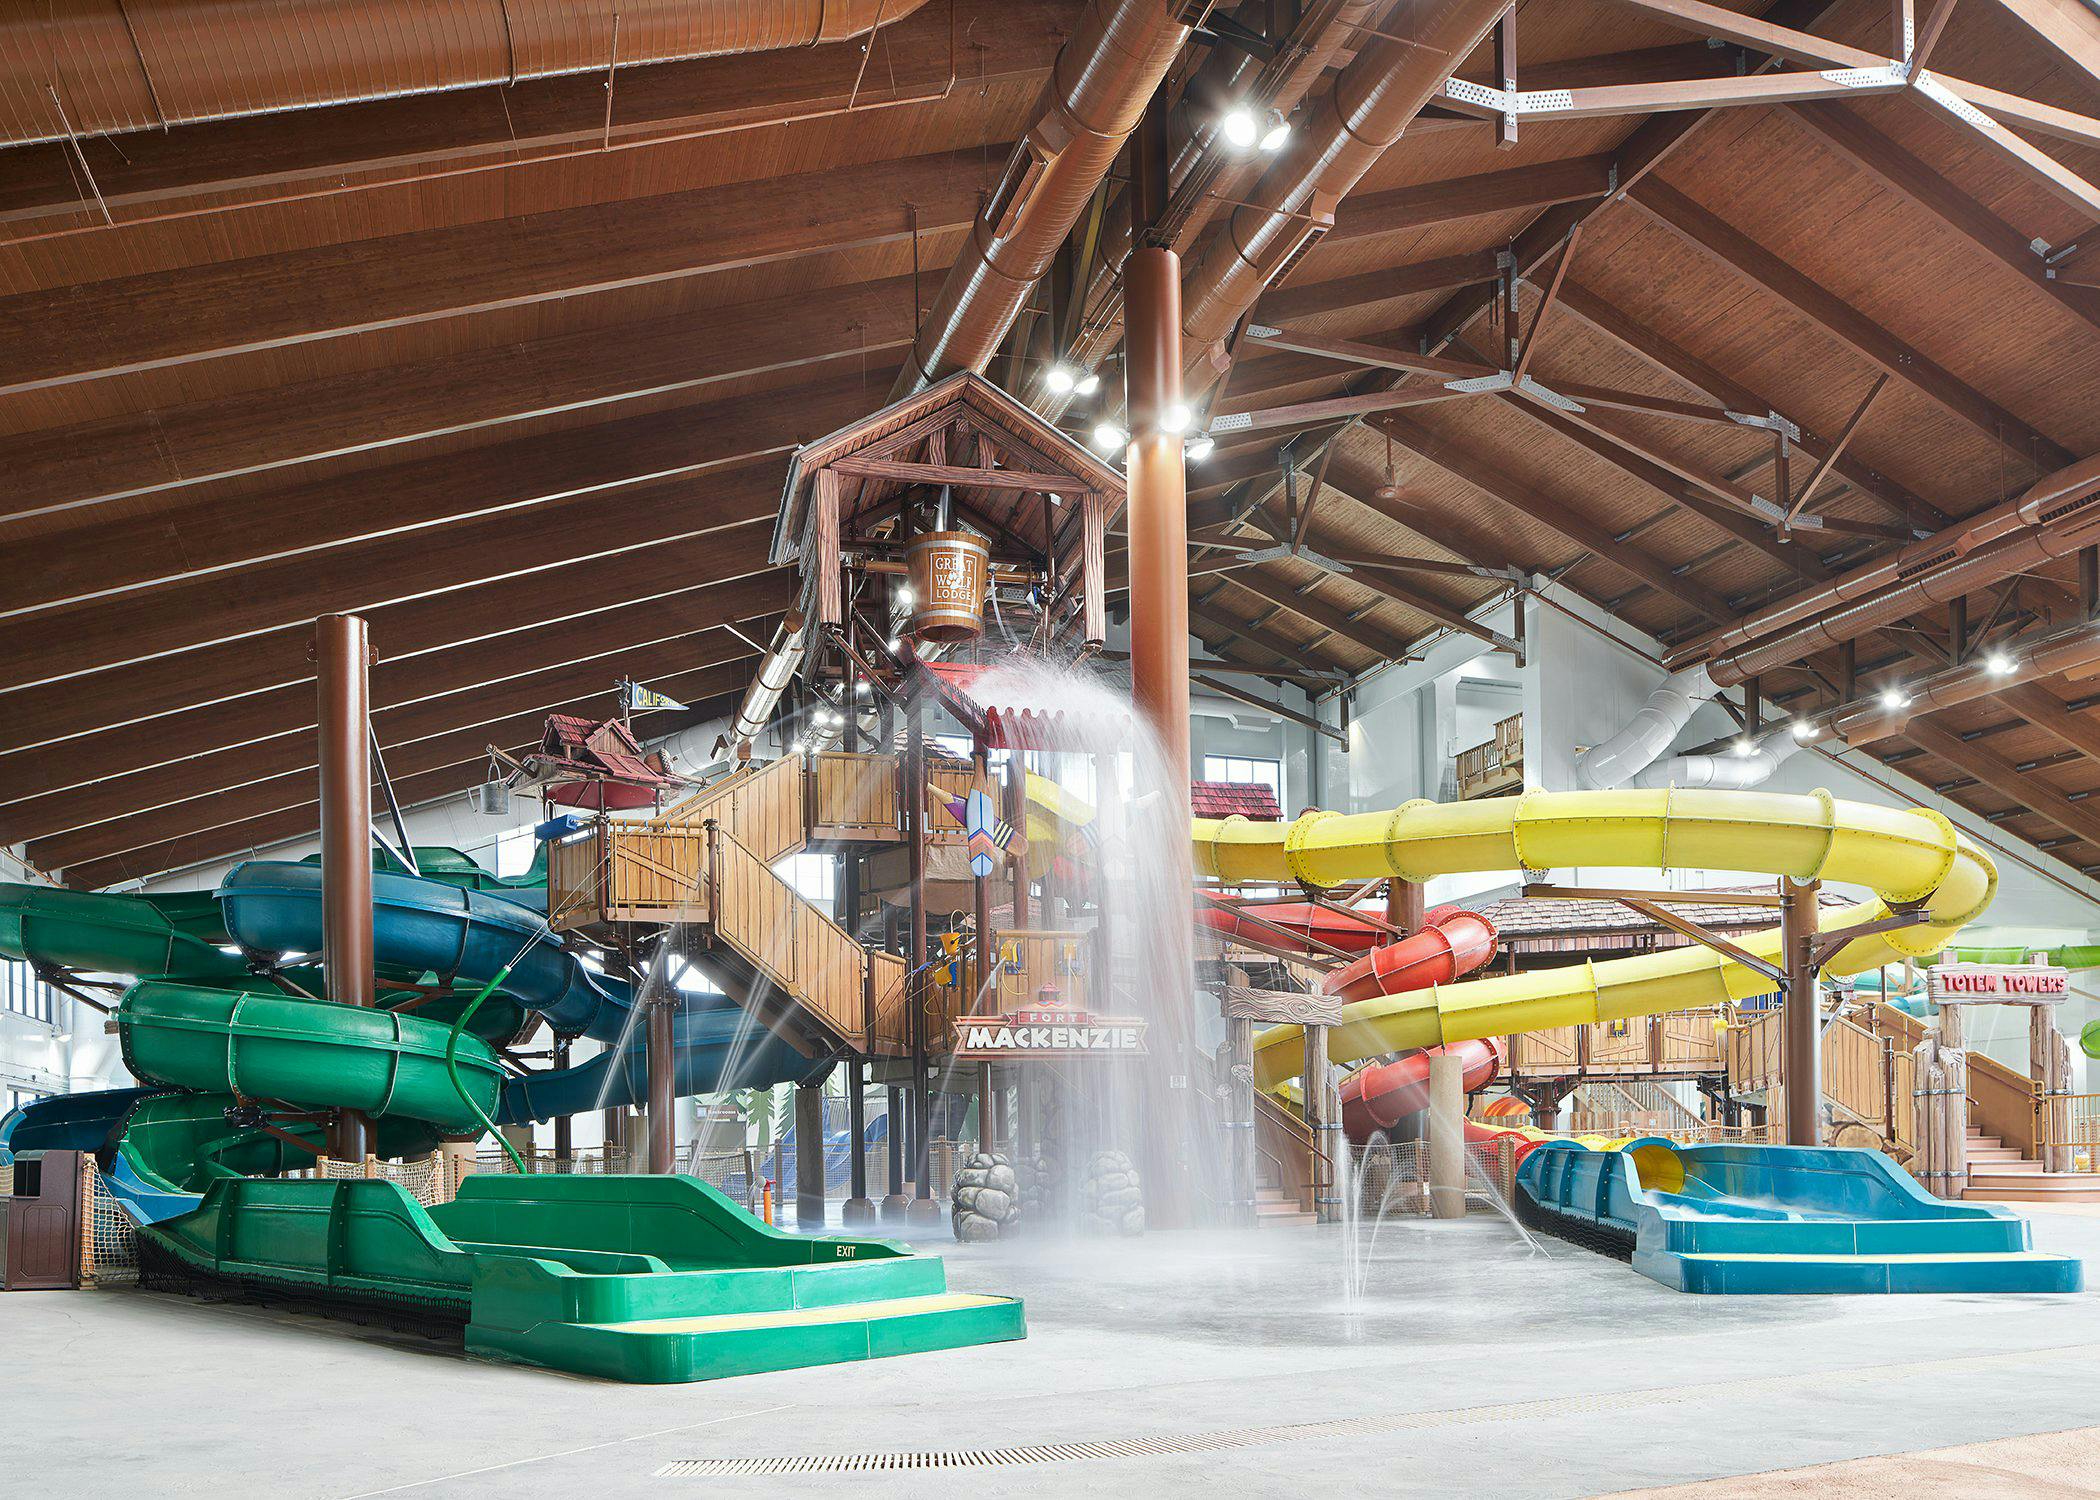 A waterpark inside a Great Wolf Lodge location